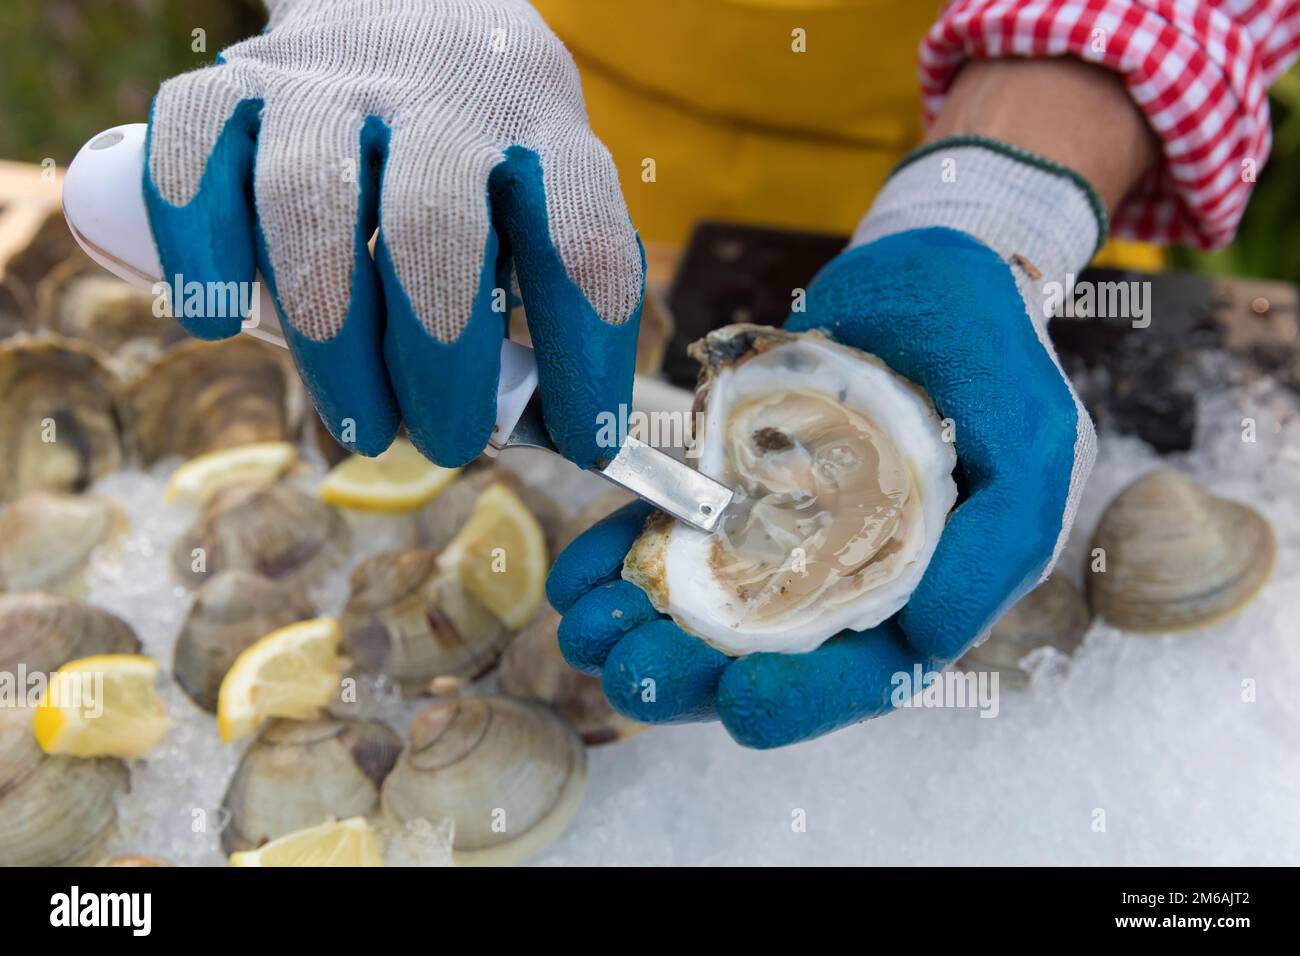 Oyster Shucking Gloves to Shuck Oysters Safely & Quickly